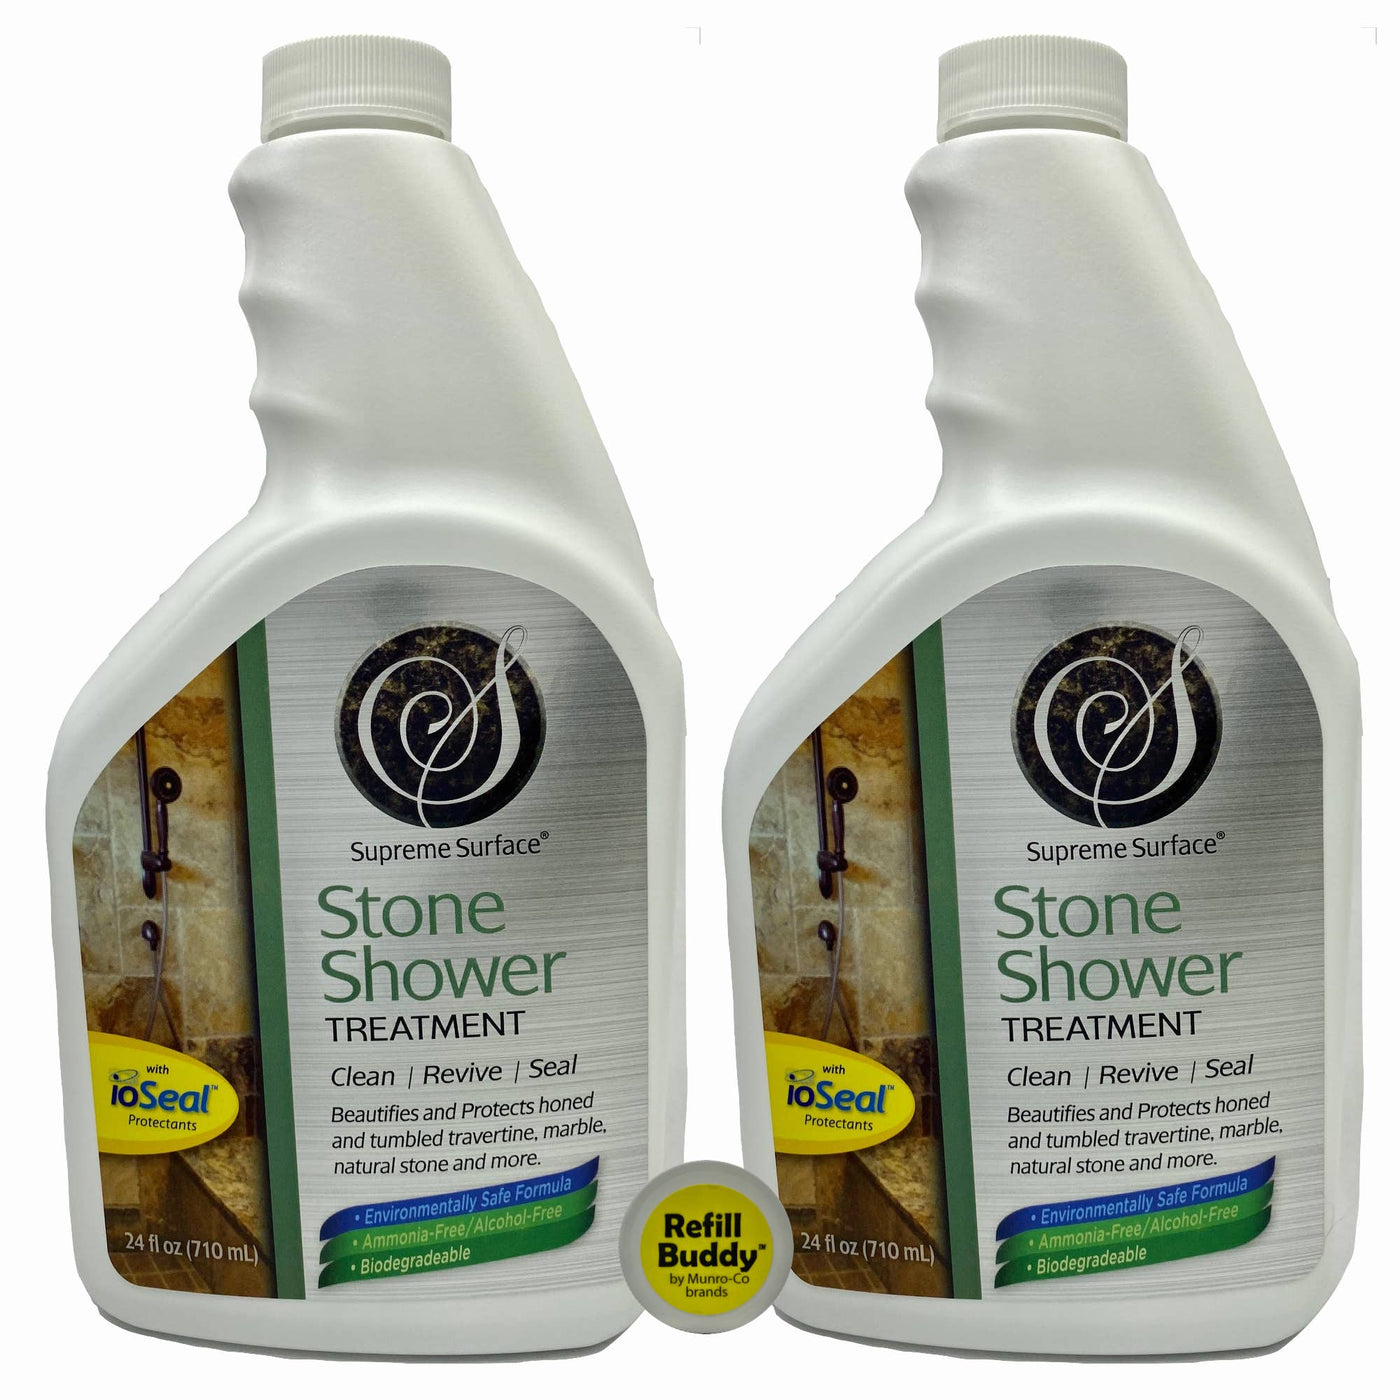 Stone Shower Treatment, Refill Buddies – Supreme Surface Cleaners